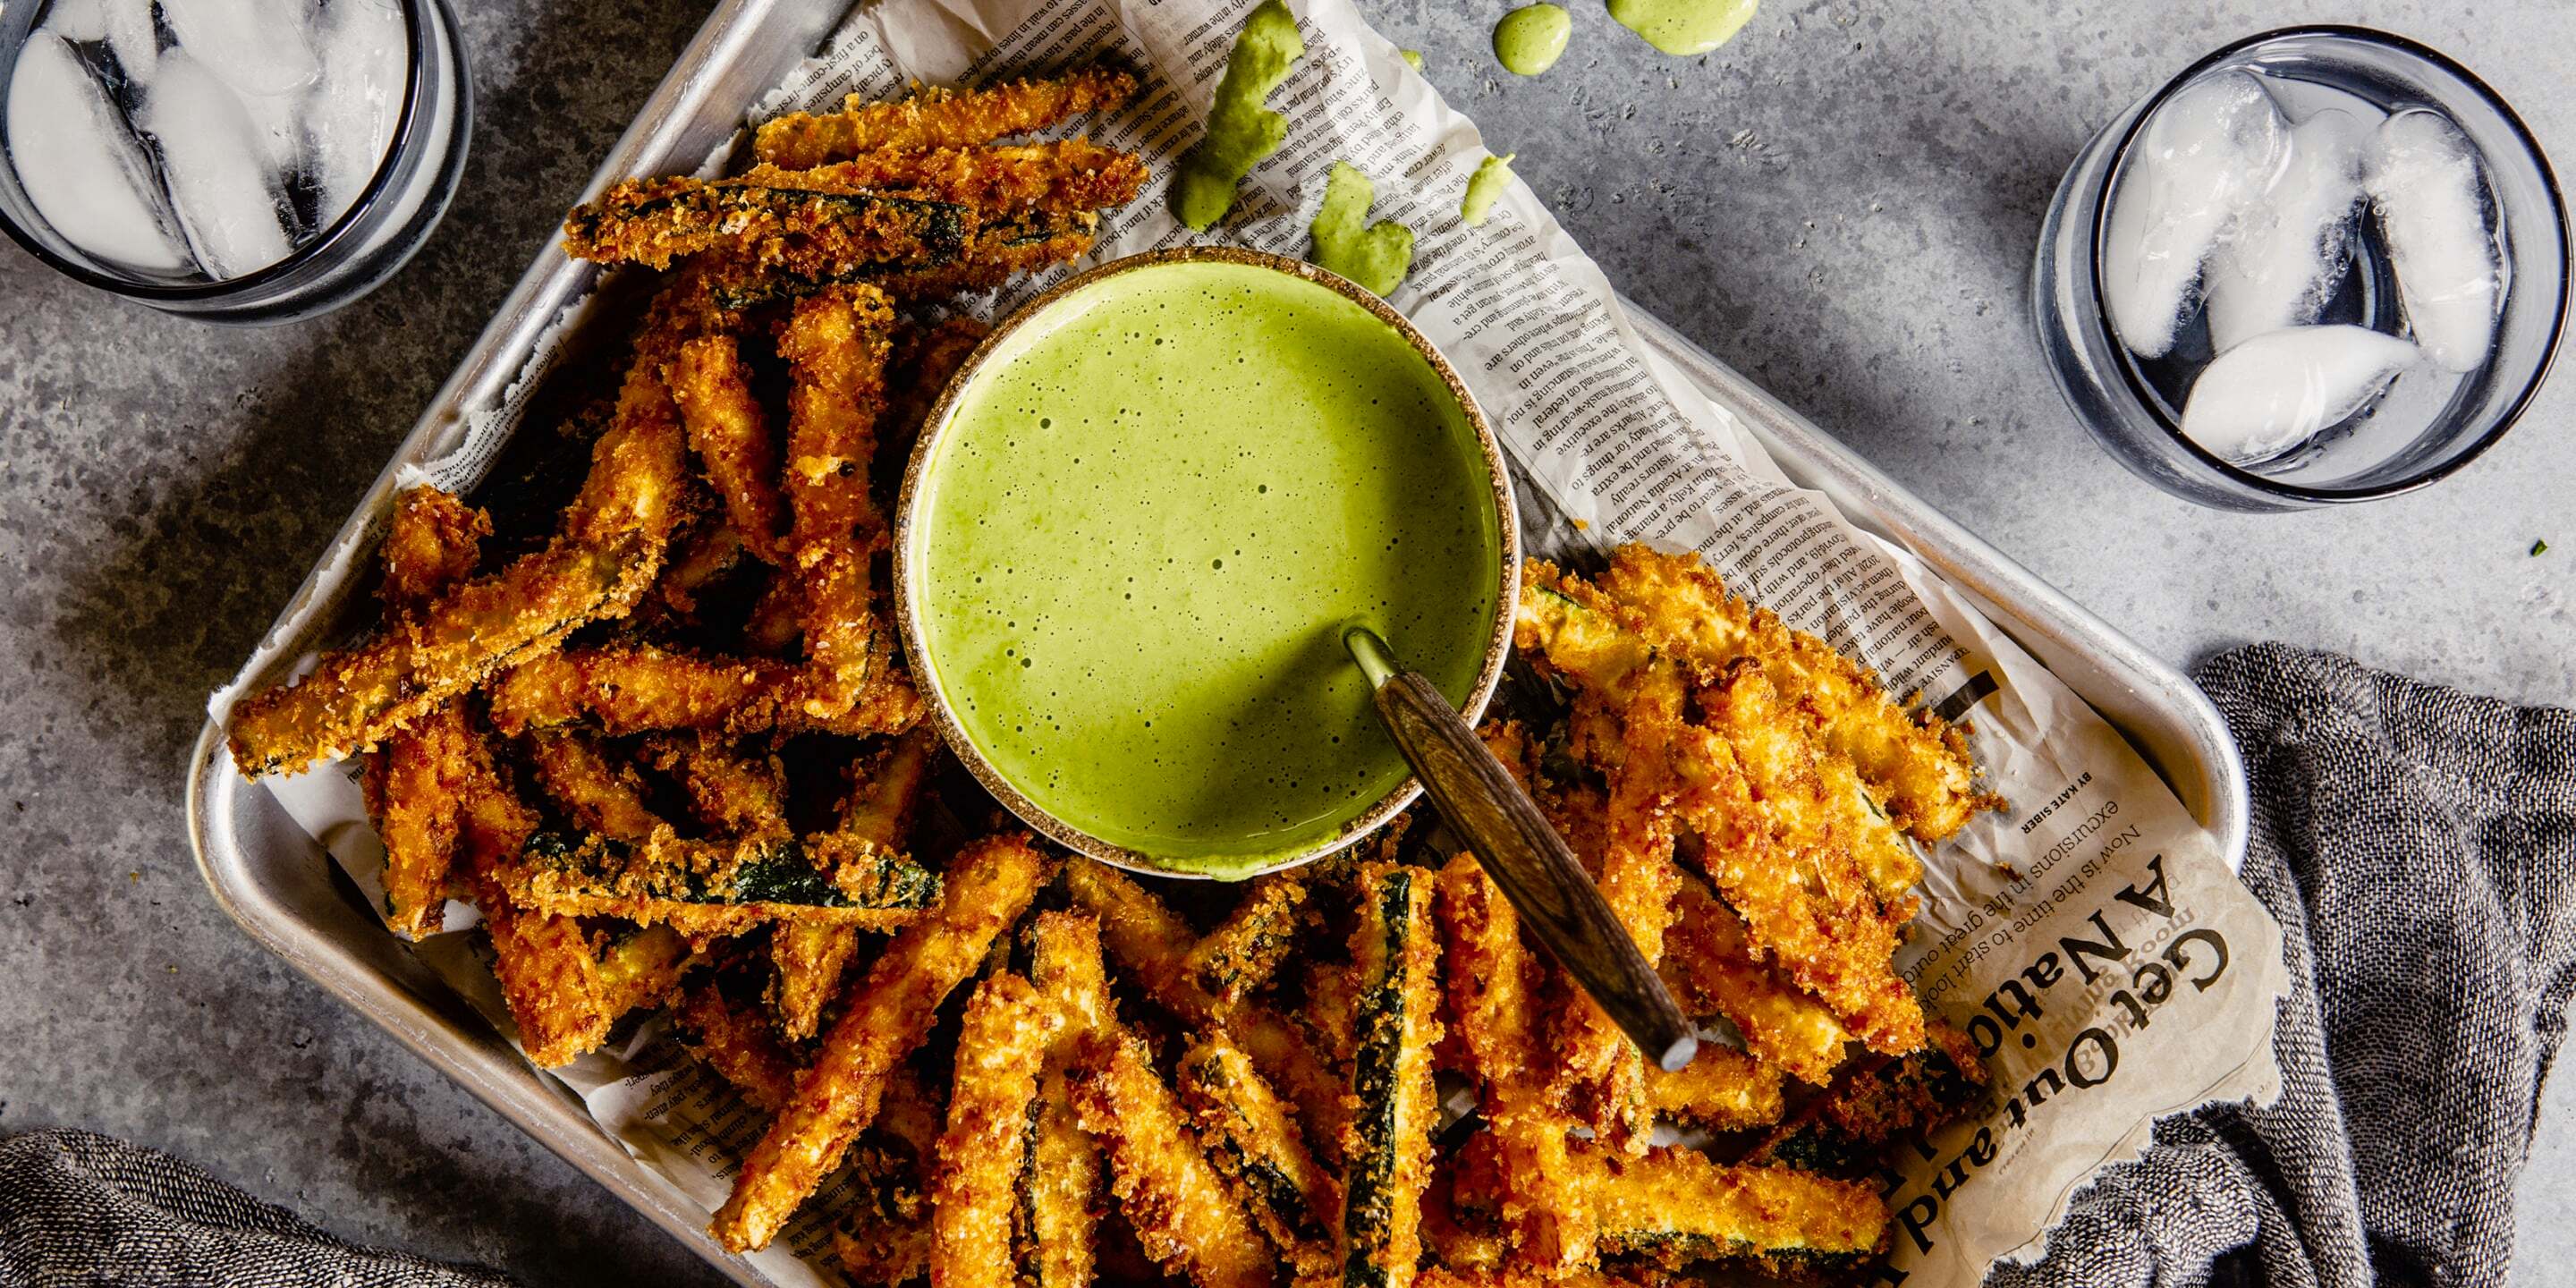 Zucchini Fries with Green Goddess Dipping Sauce